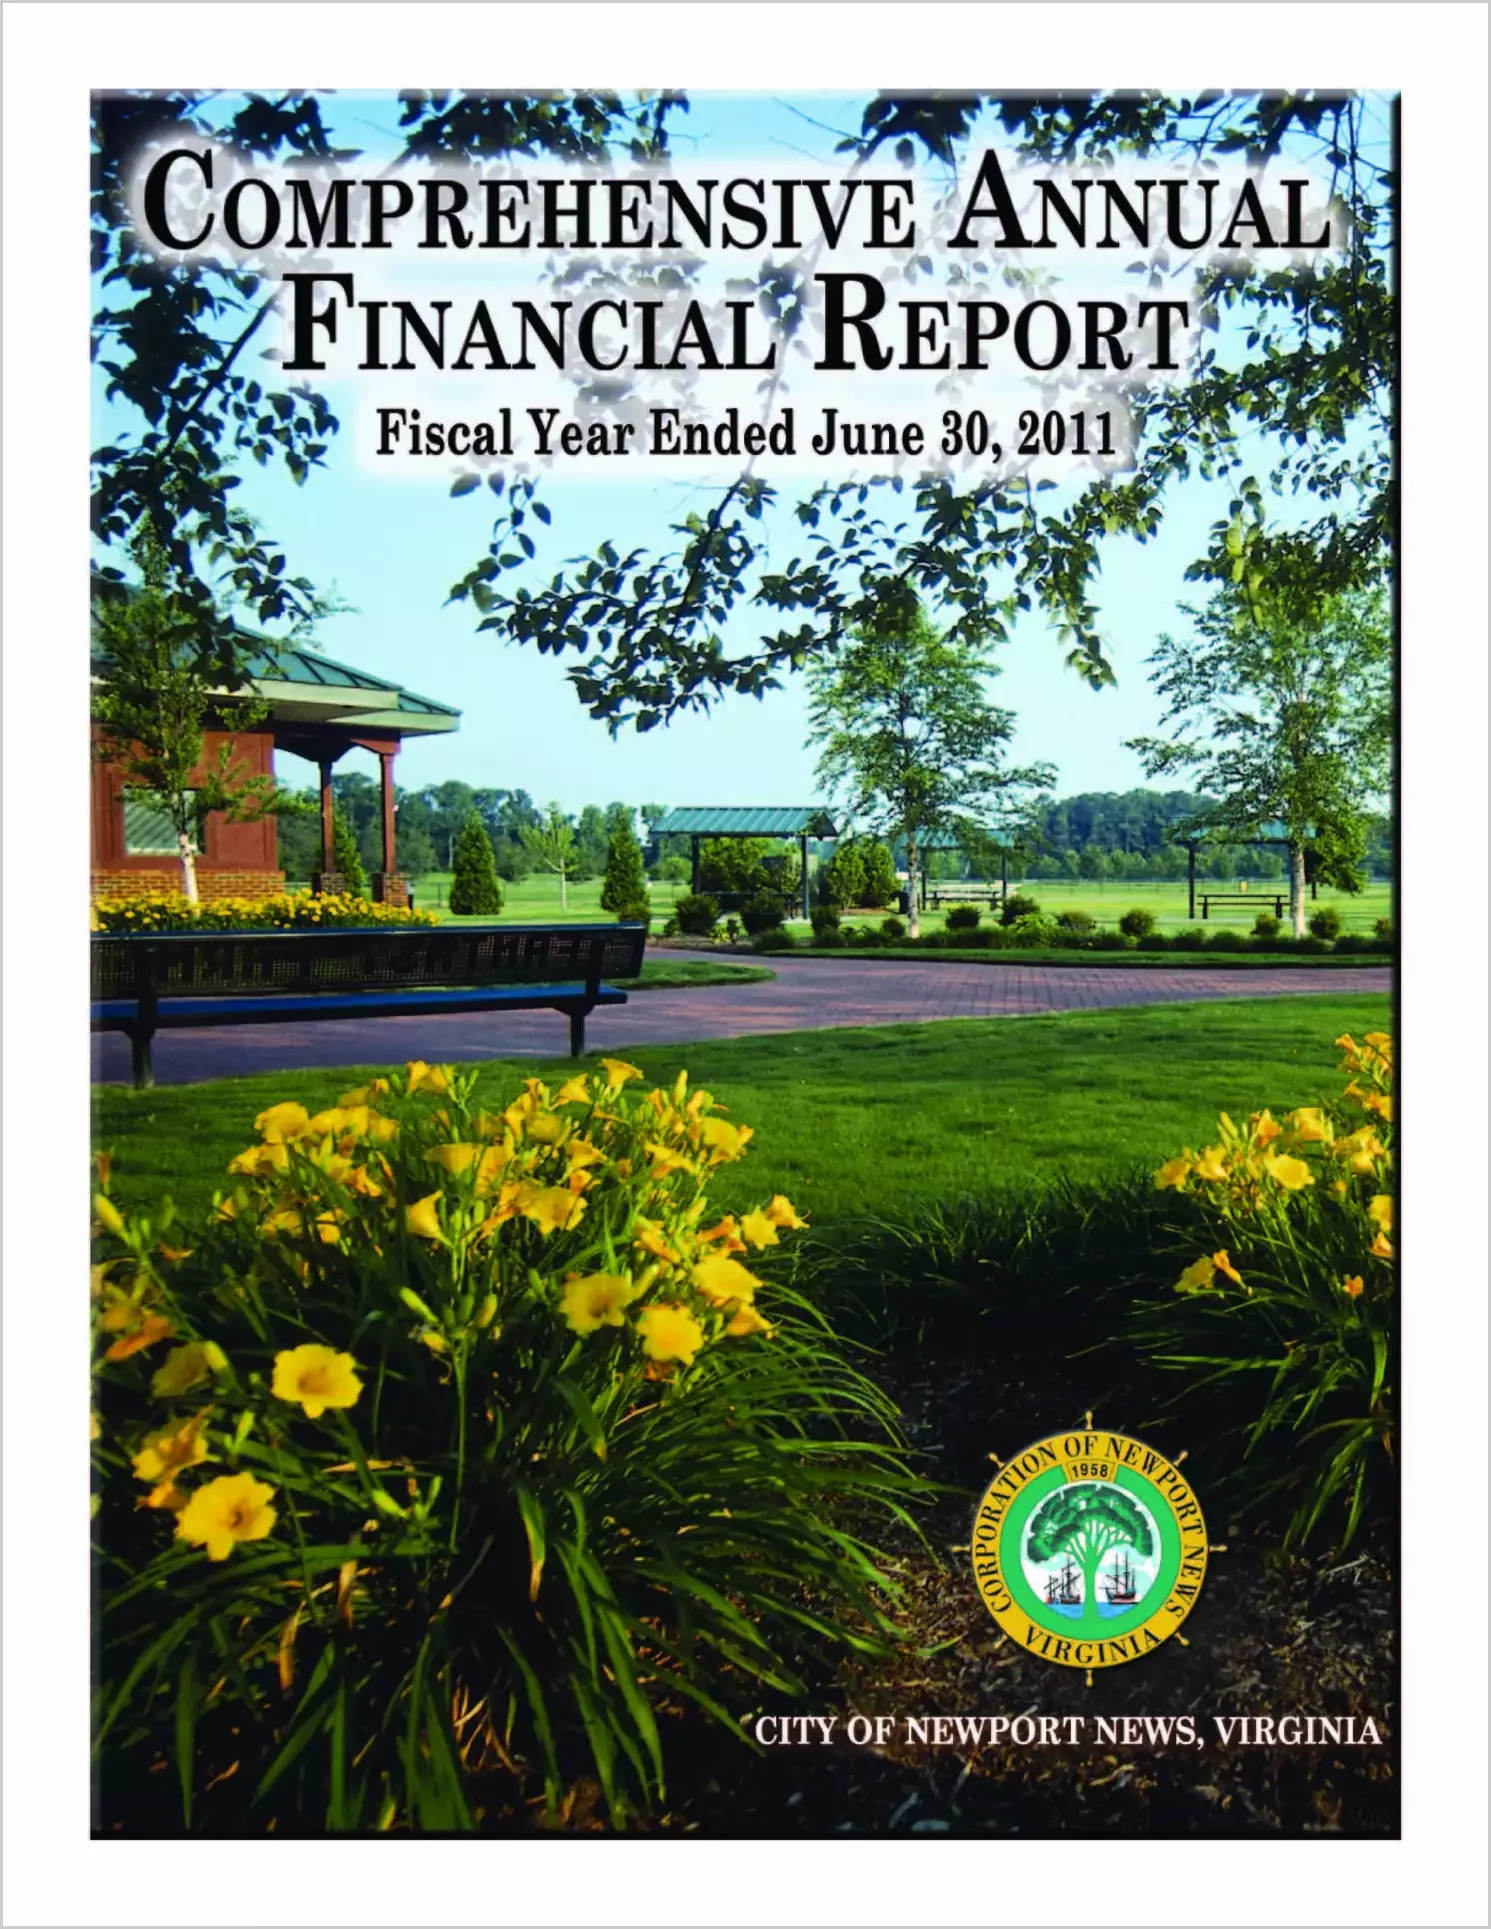 2010 Annual Financial Report for City of Newport News